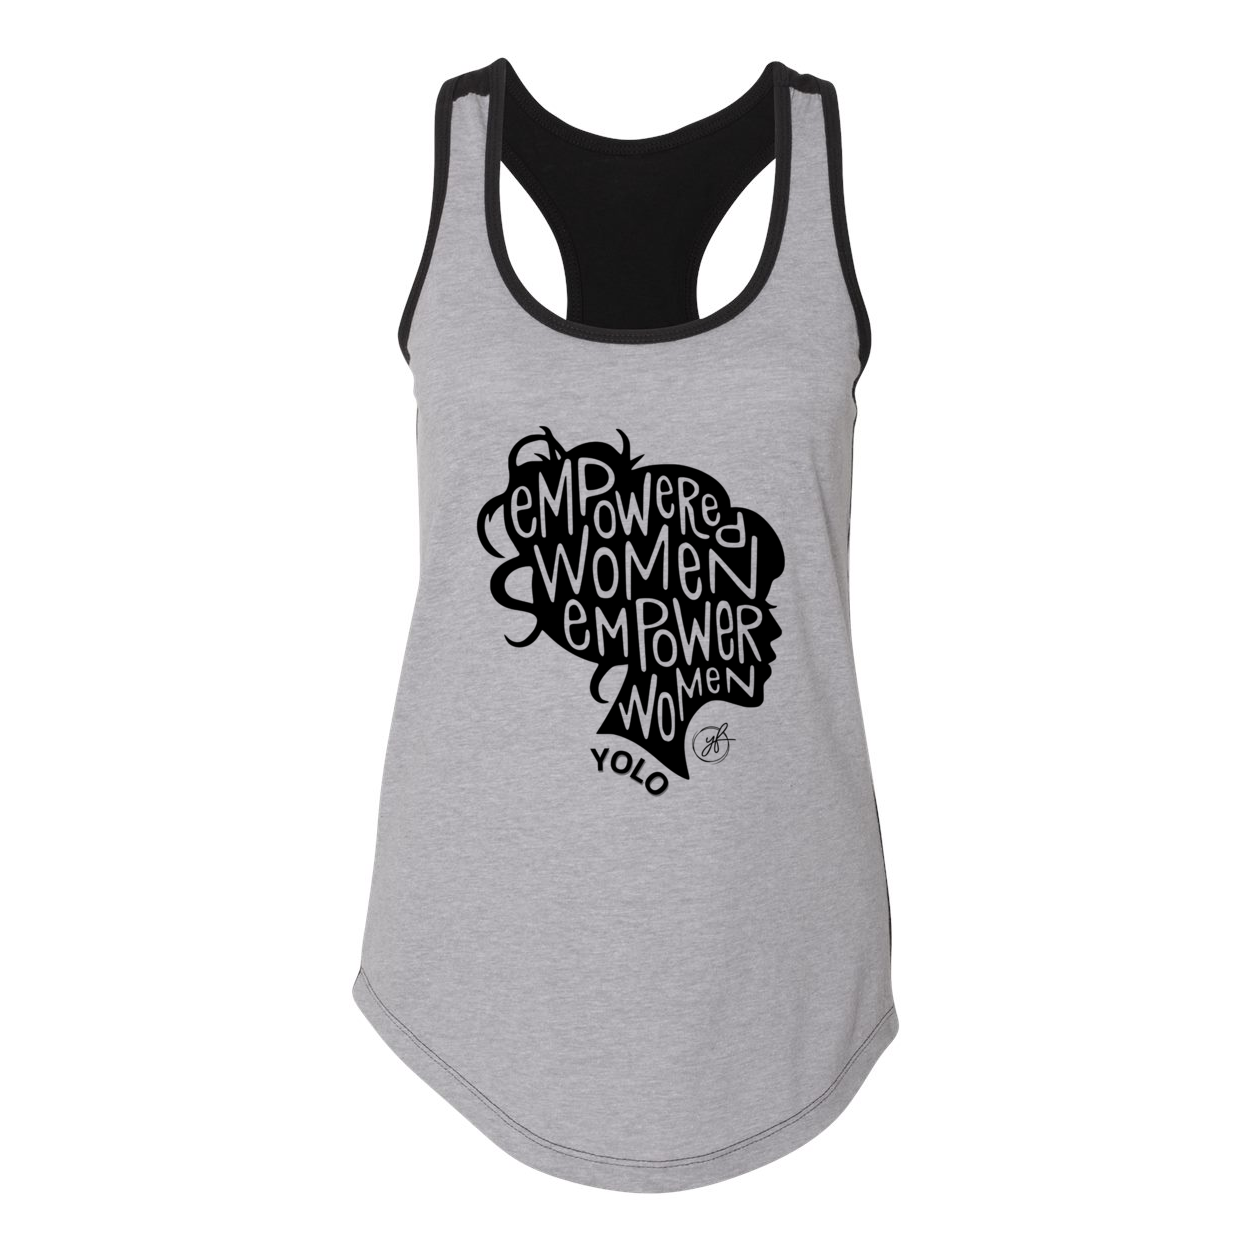 YOLO FITTED'S "EMPOWERED WOMEN" RACER BACK TANK